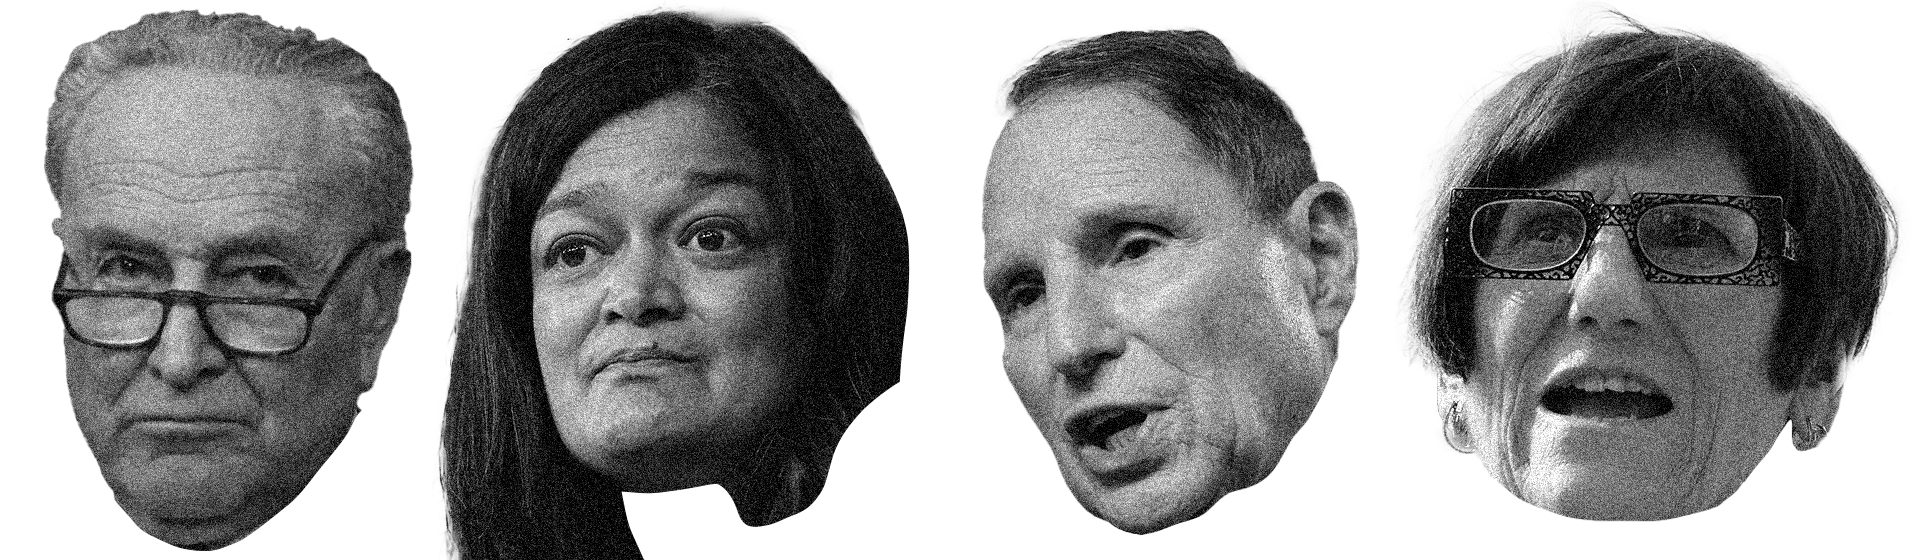 The faces of Chuck Schumer, Pramila Jayapal, Ron Wyden, and Rosa DeLauro, side by side and in black and white.